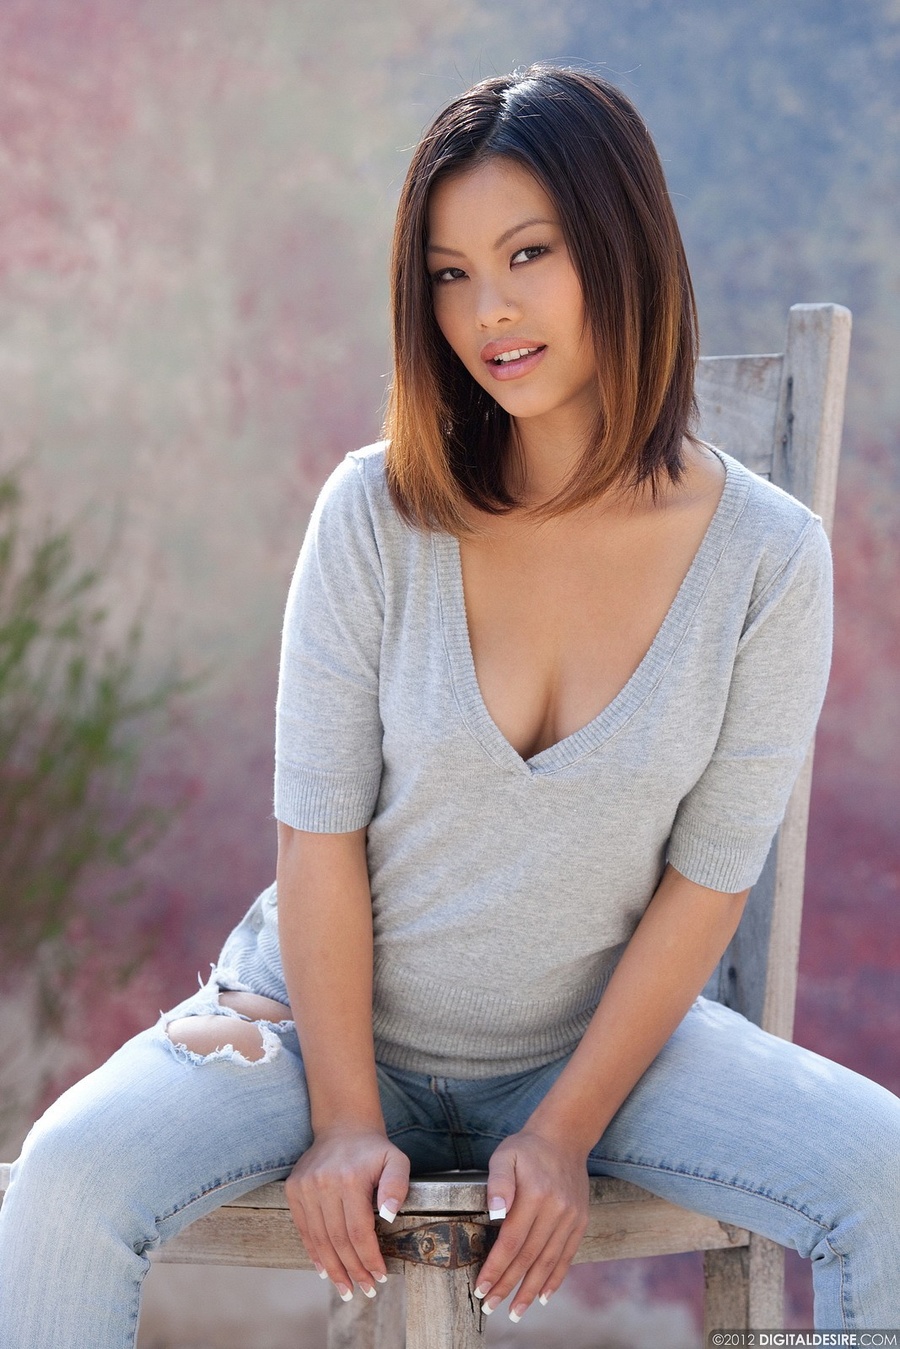 Lovely Asian babe in torn jeans exposing he - XXX Dessert - Picture 2